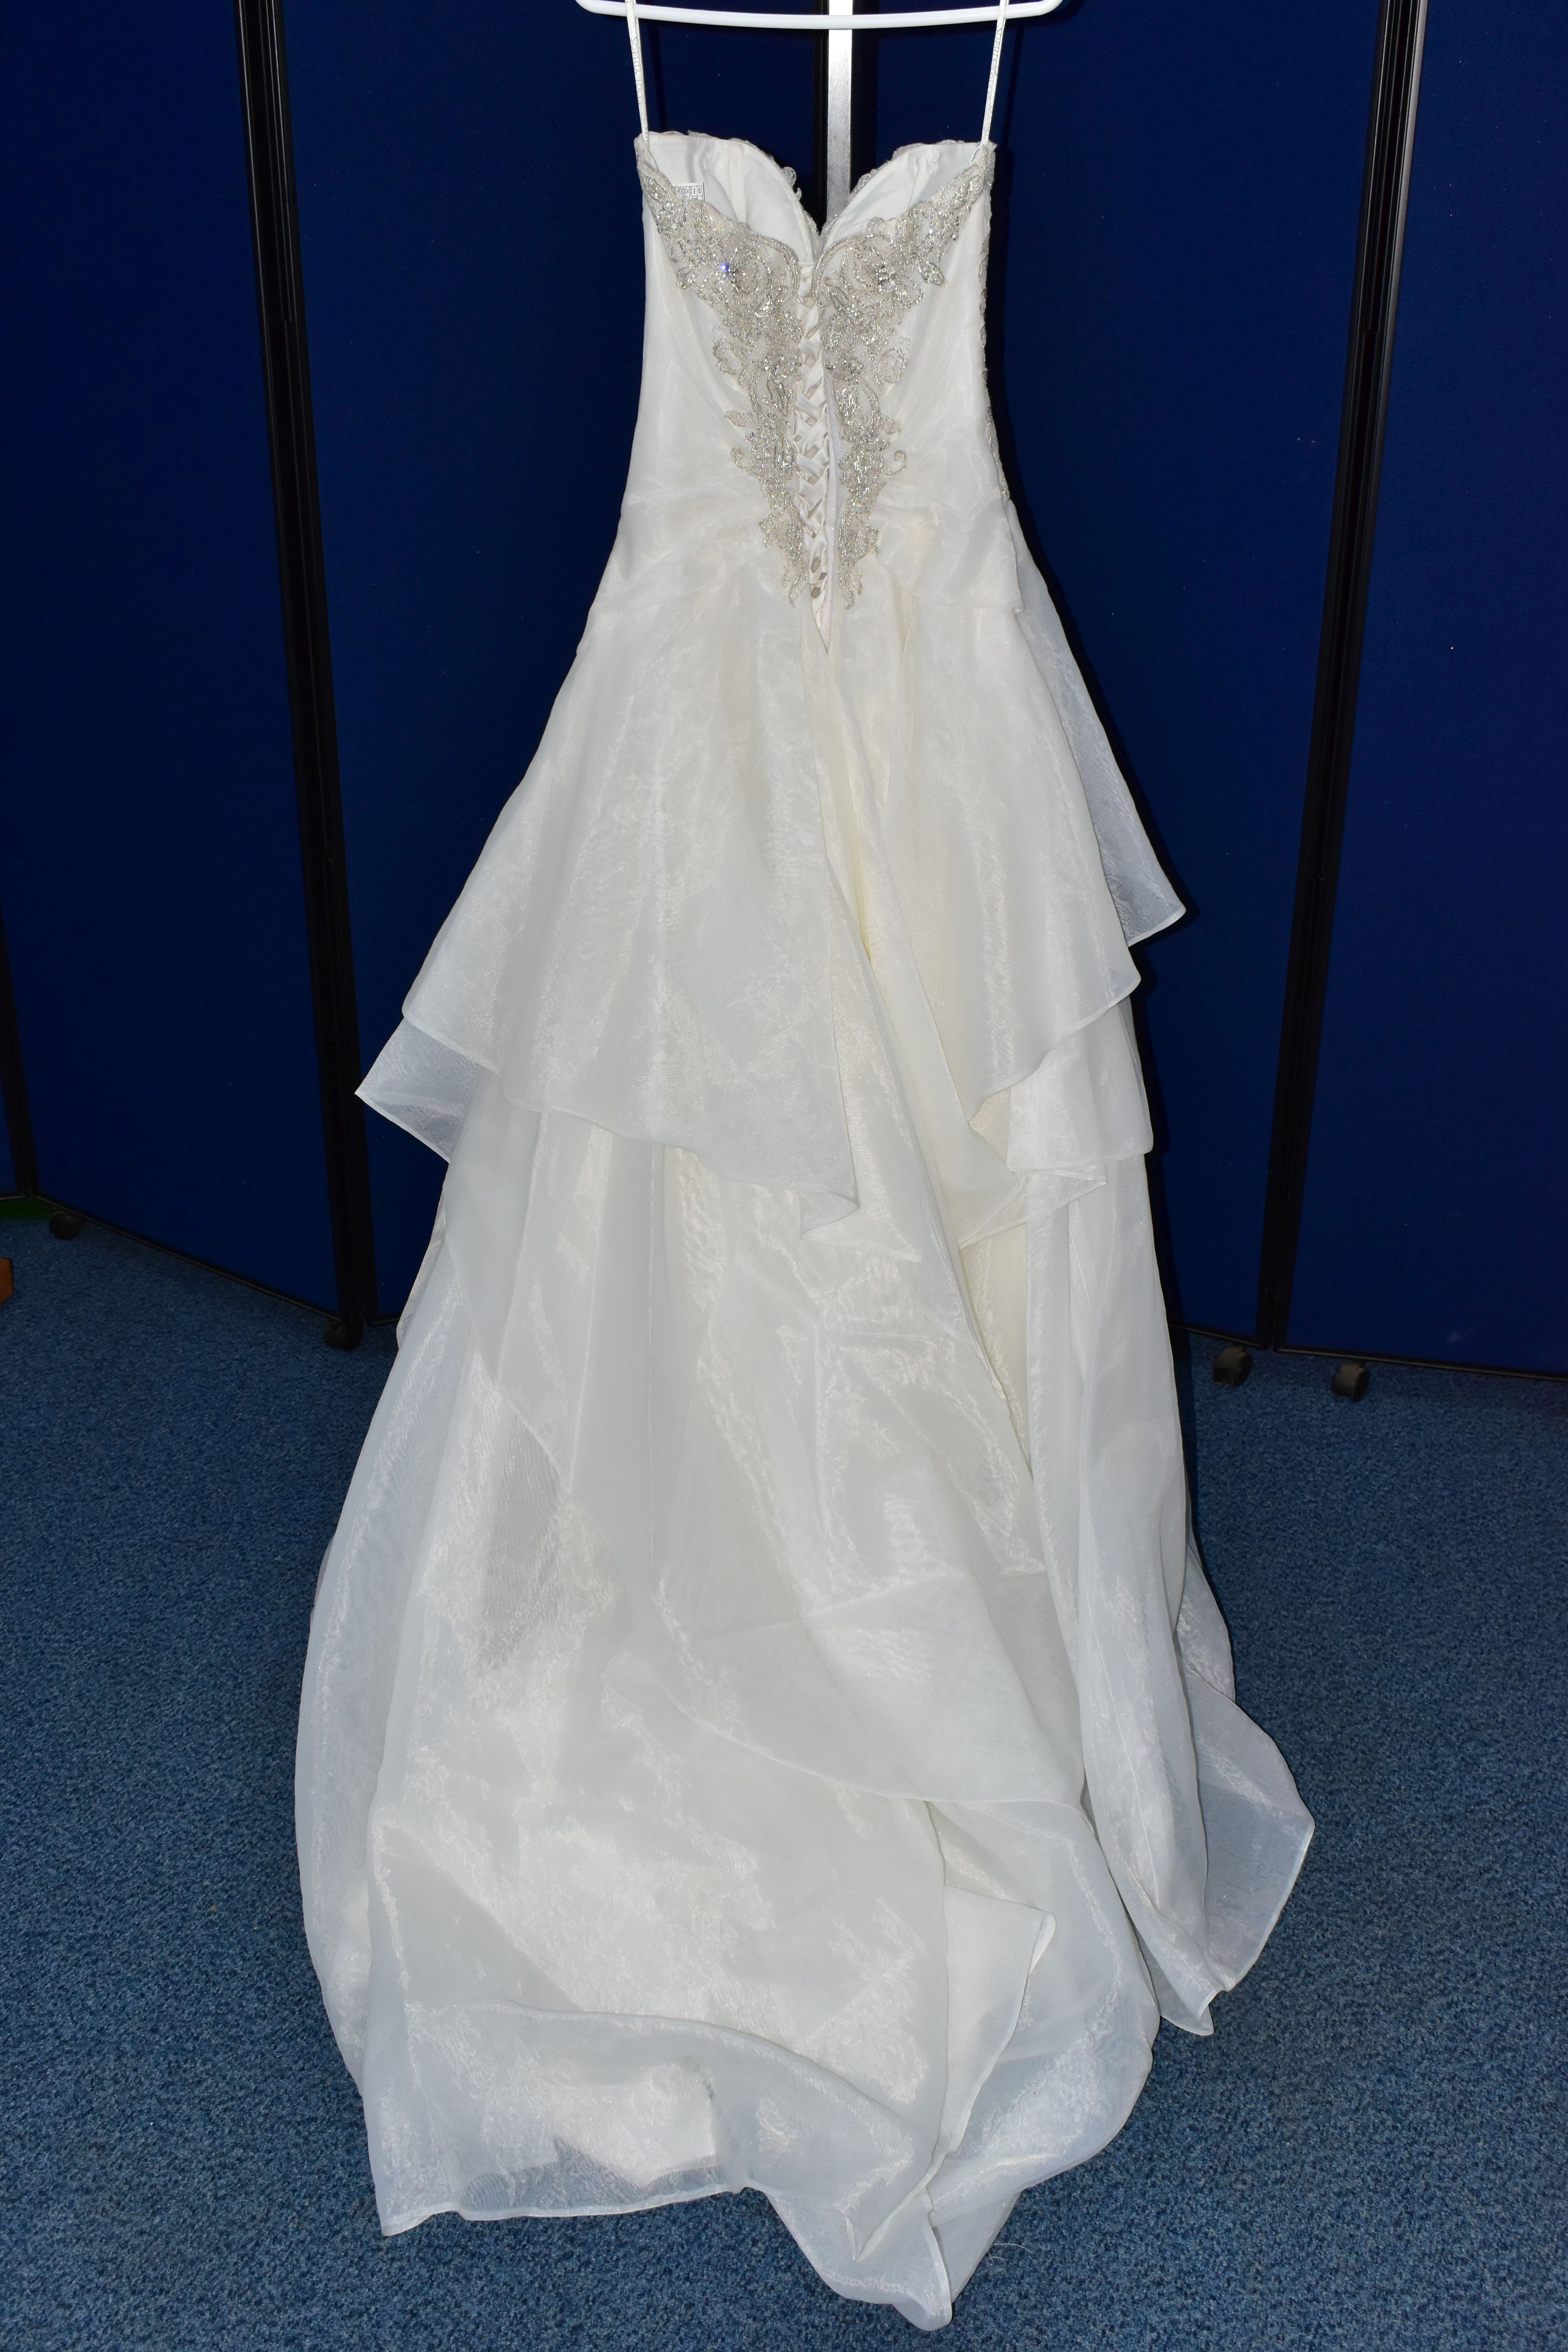 WEDDING DRESS, size 6, long train, pewter accent beaded appliques, strapping detail in the back, - Image 8 of 10